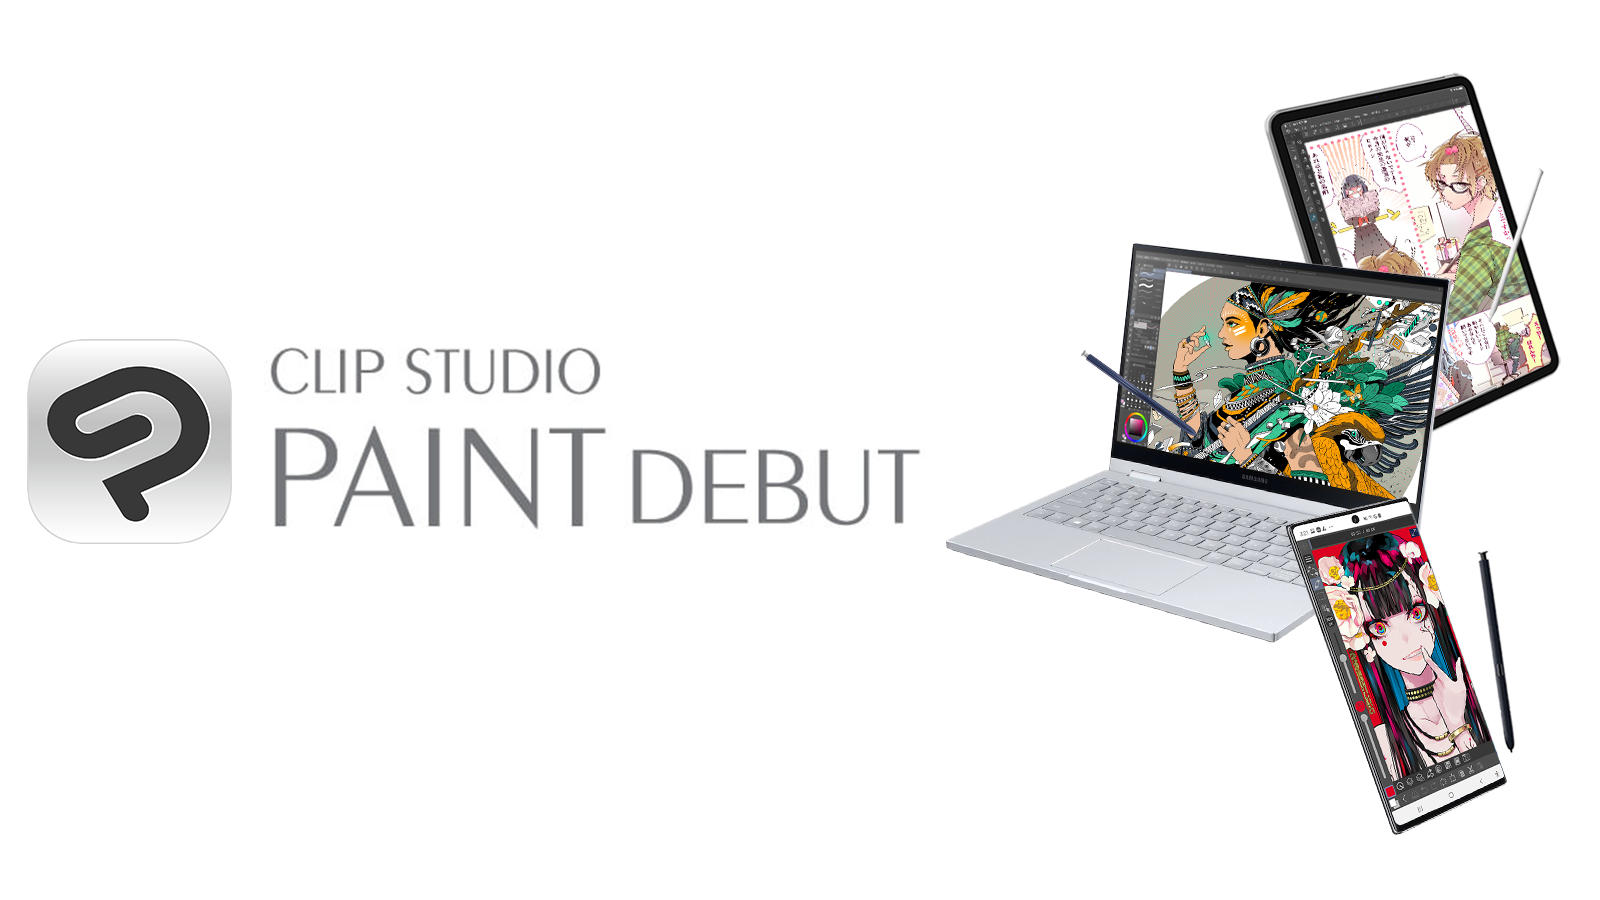 Alliance partner grade, Clip Studio Paint DEBUT,  to be made available on tablets and smartphones